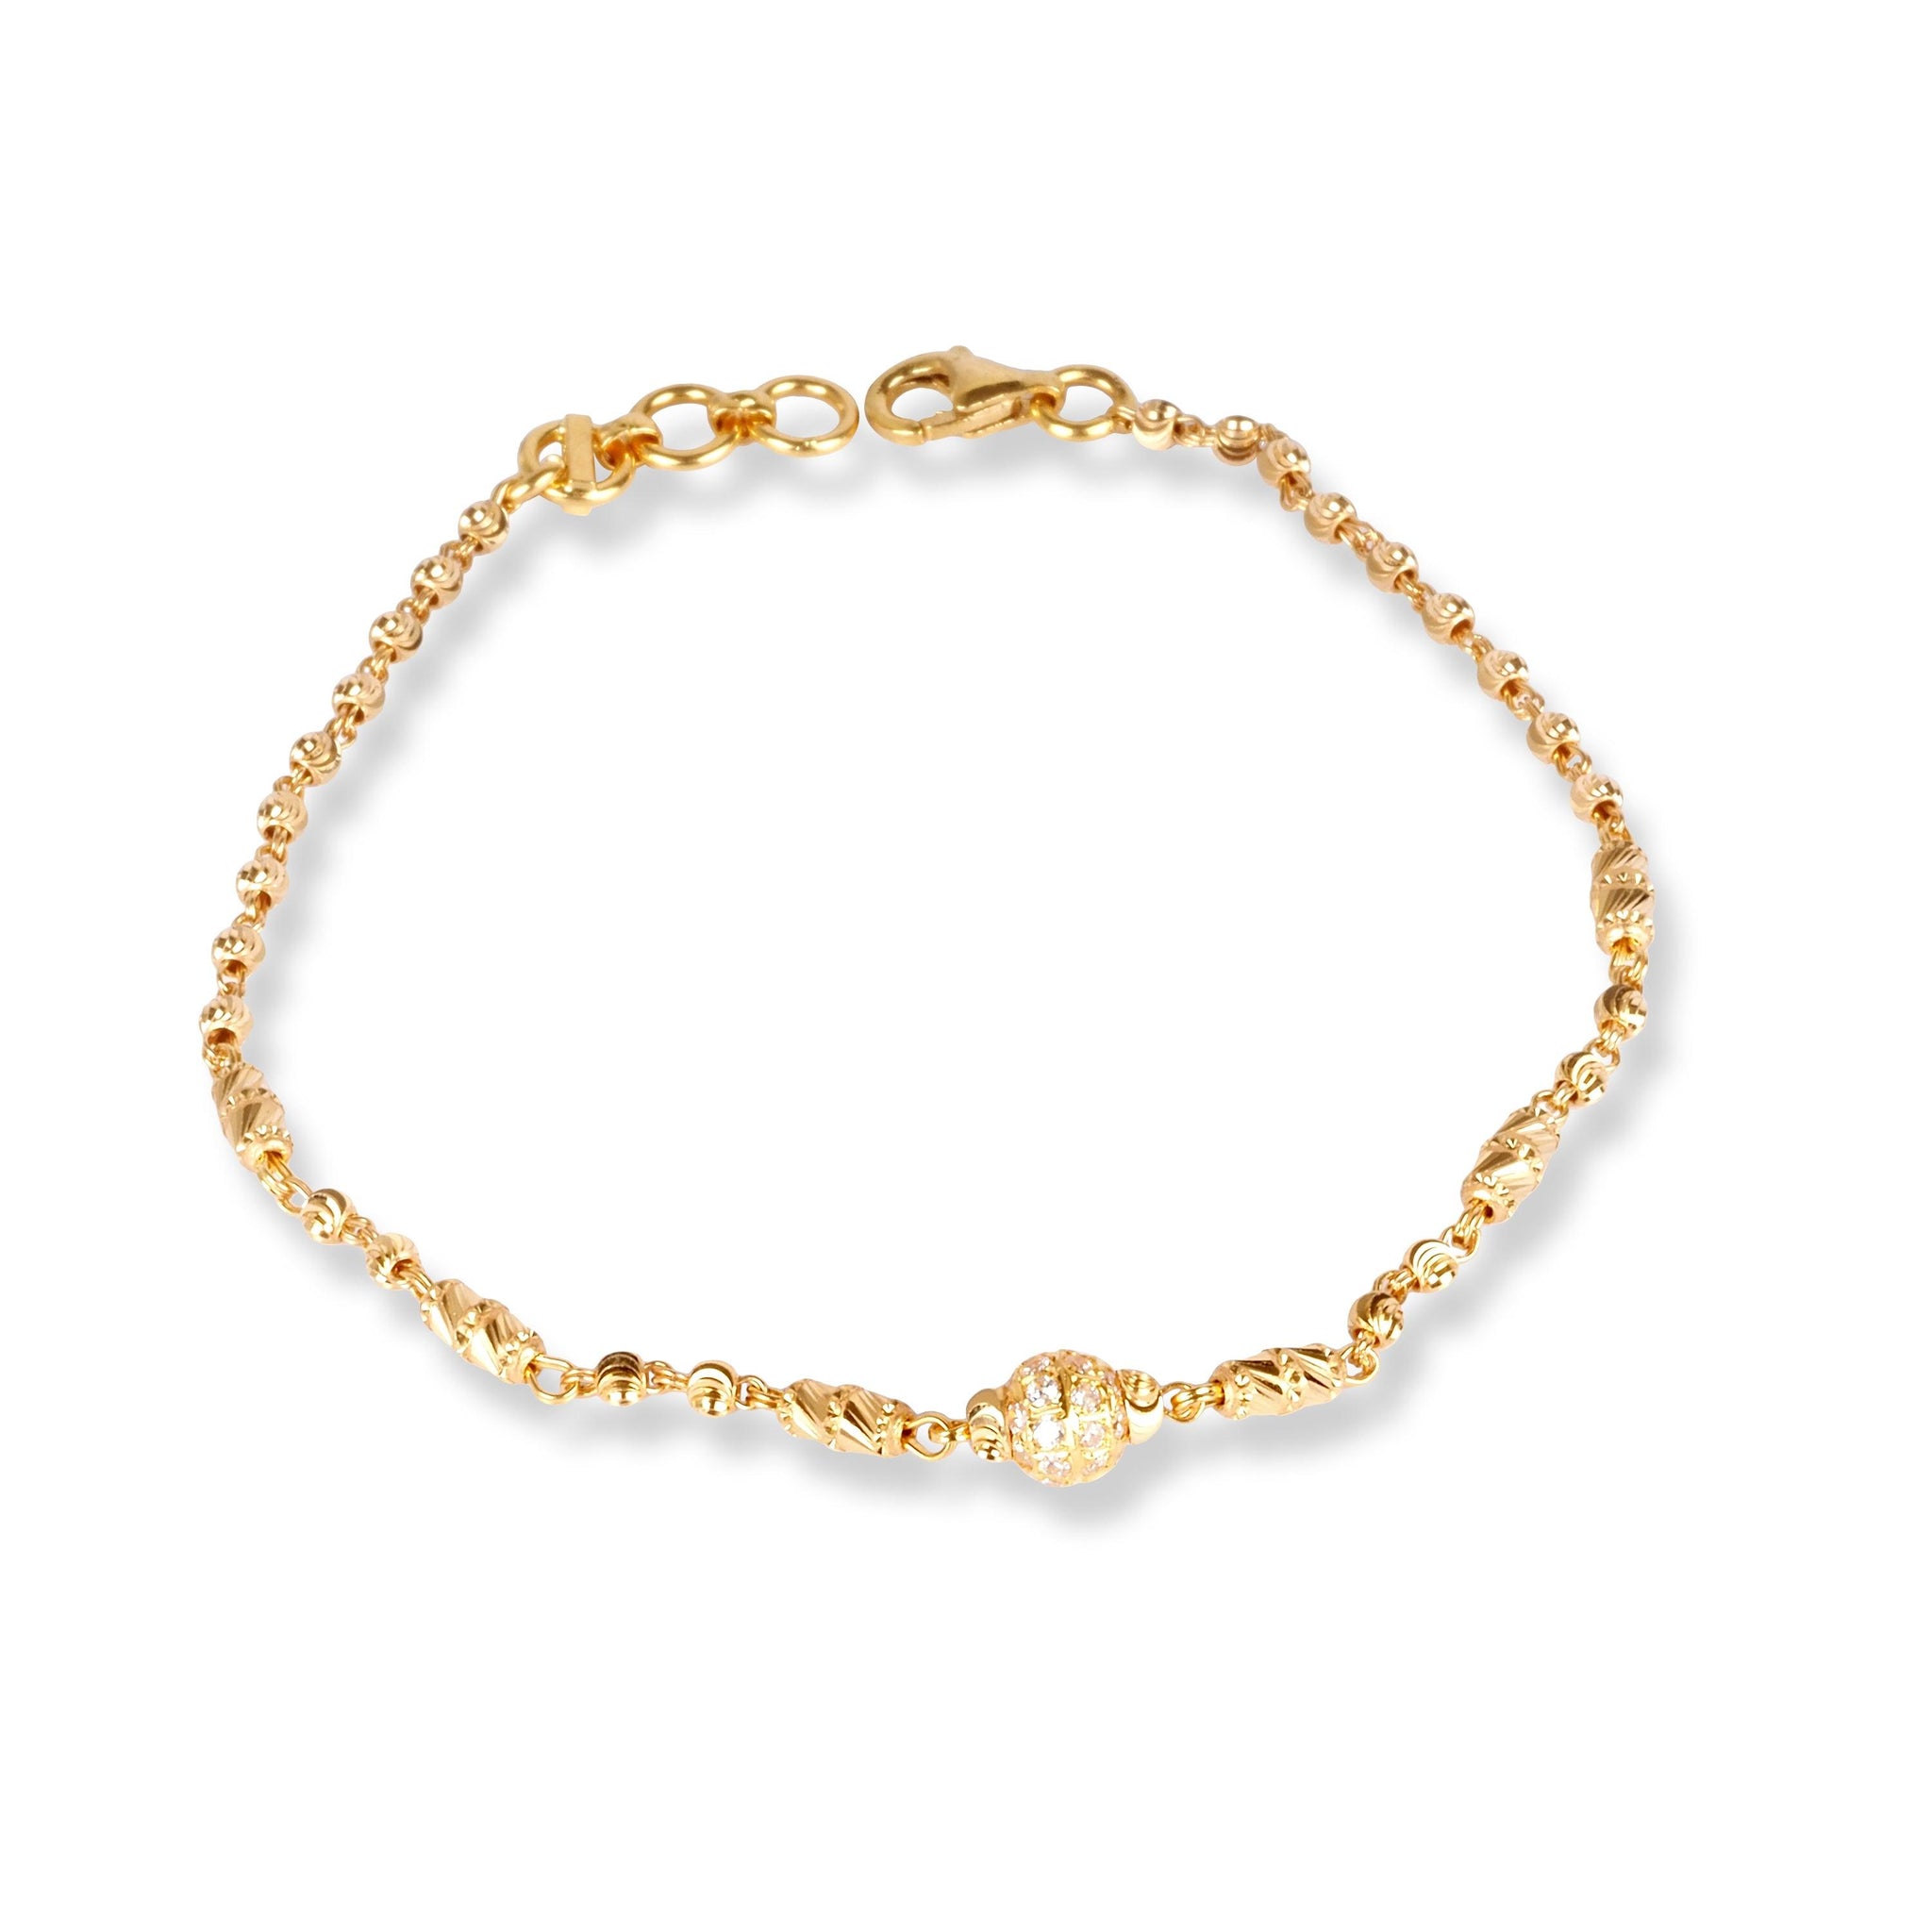 22ct Gold Bracelet with Diamond cut Beads and Cubic Zirconia Stones LBR-7133G